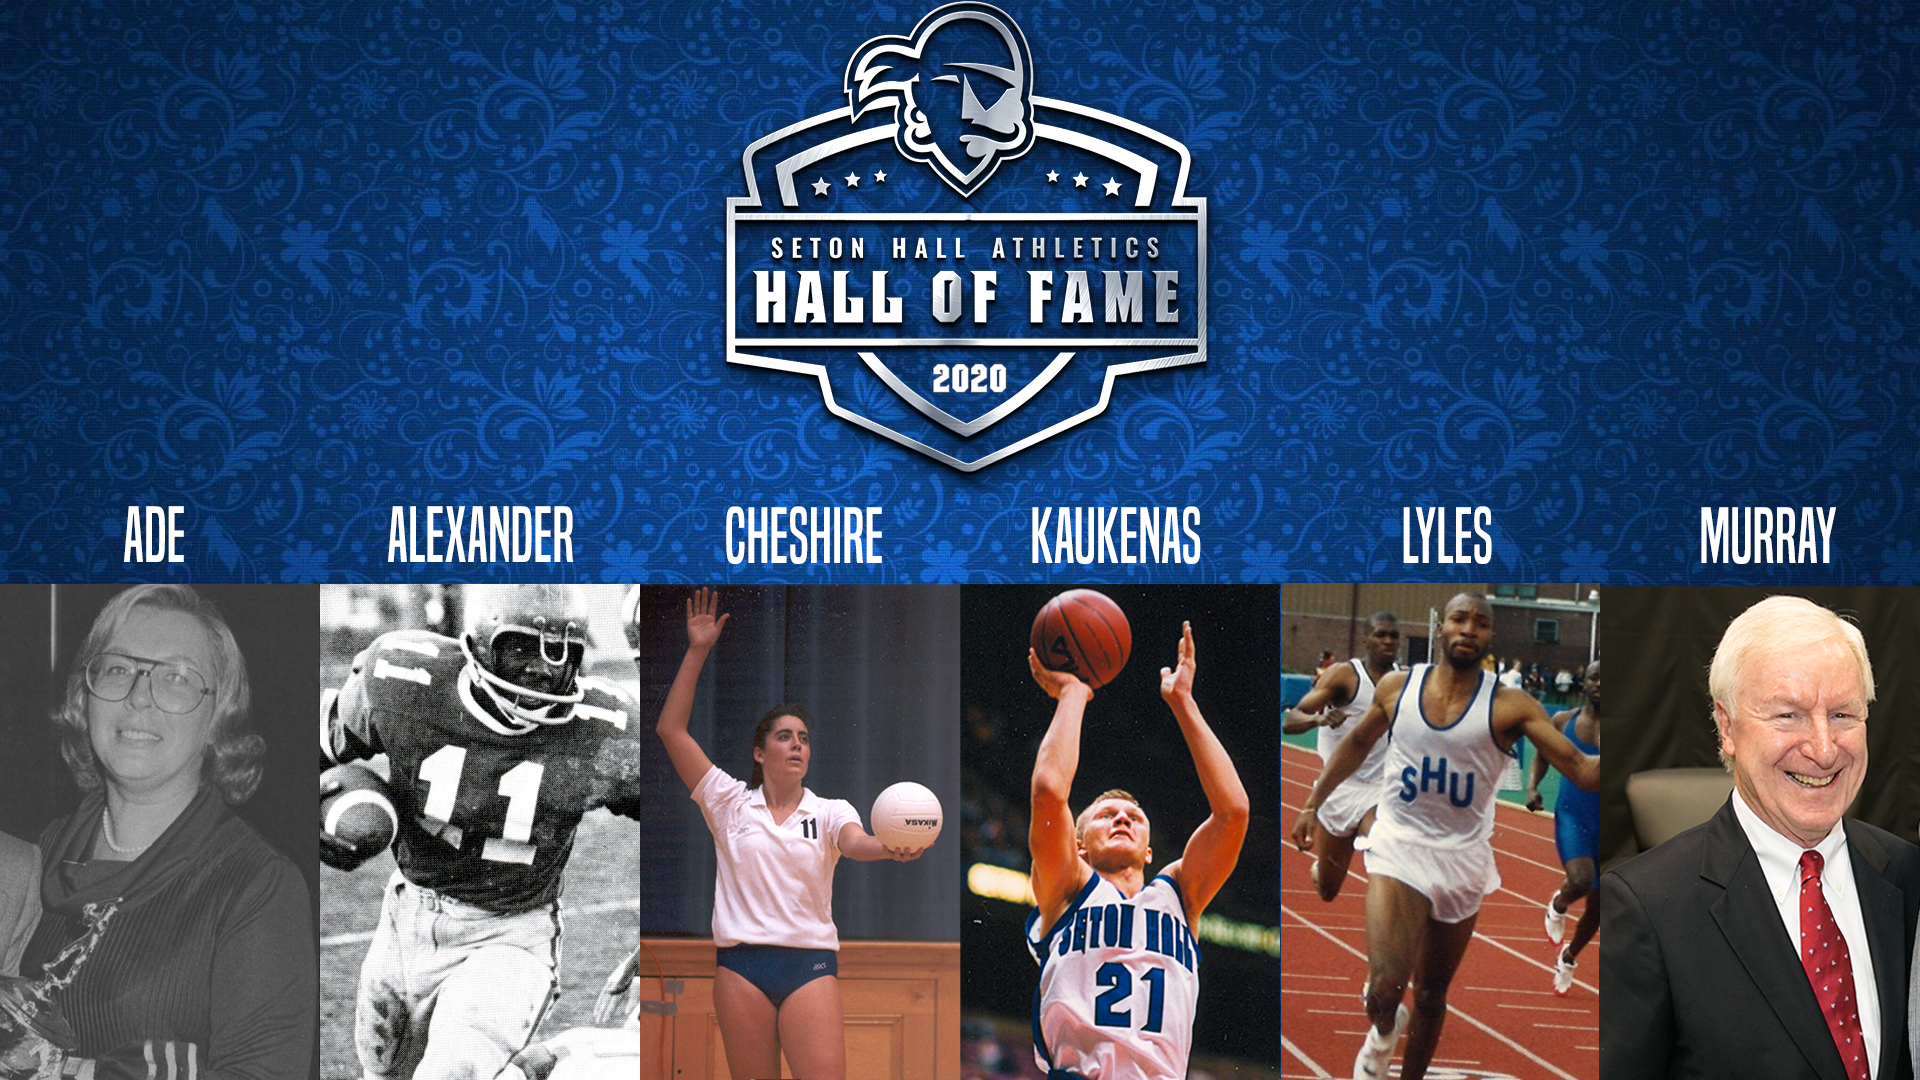 HALL_OF_FAME_2020_ANNOUNCEMENT.jpg